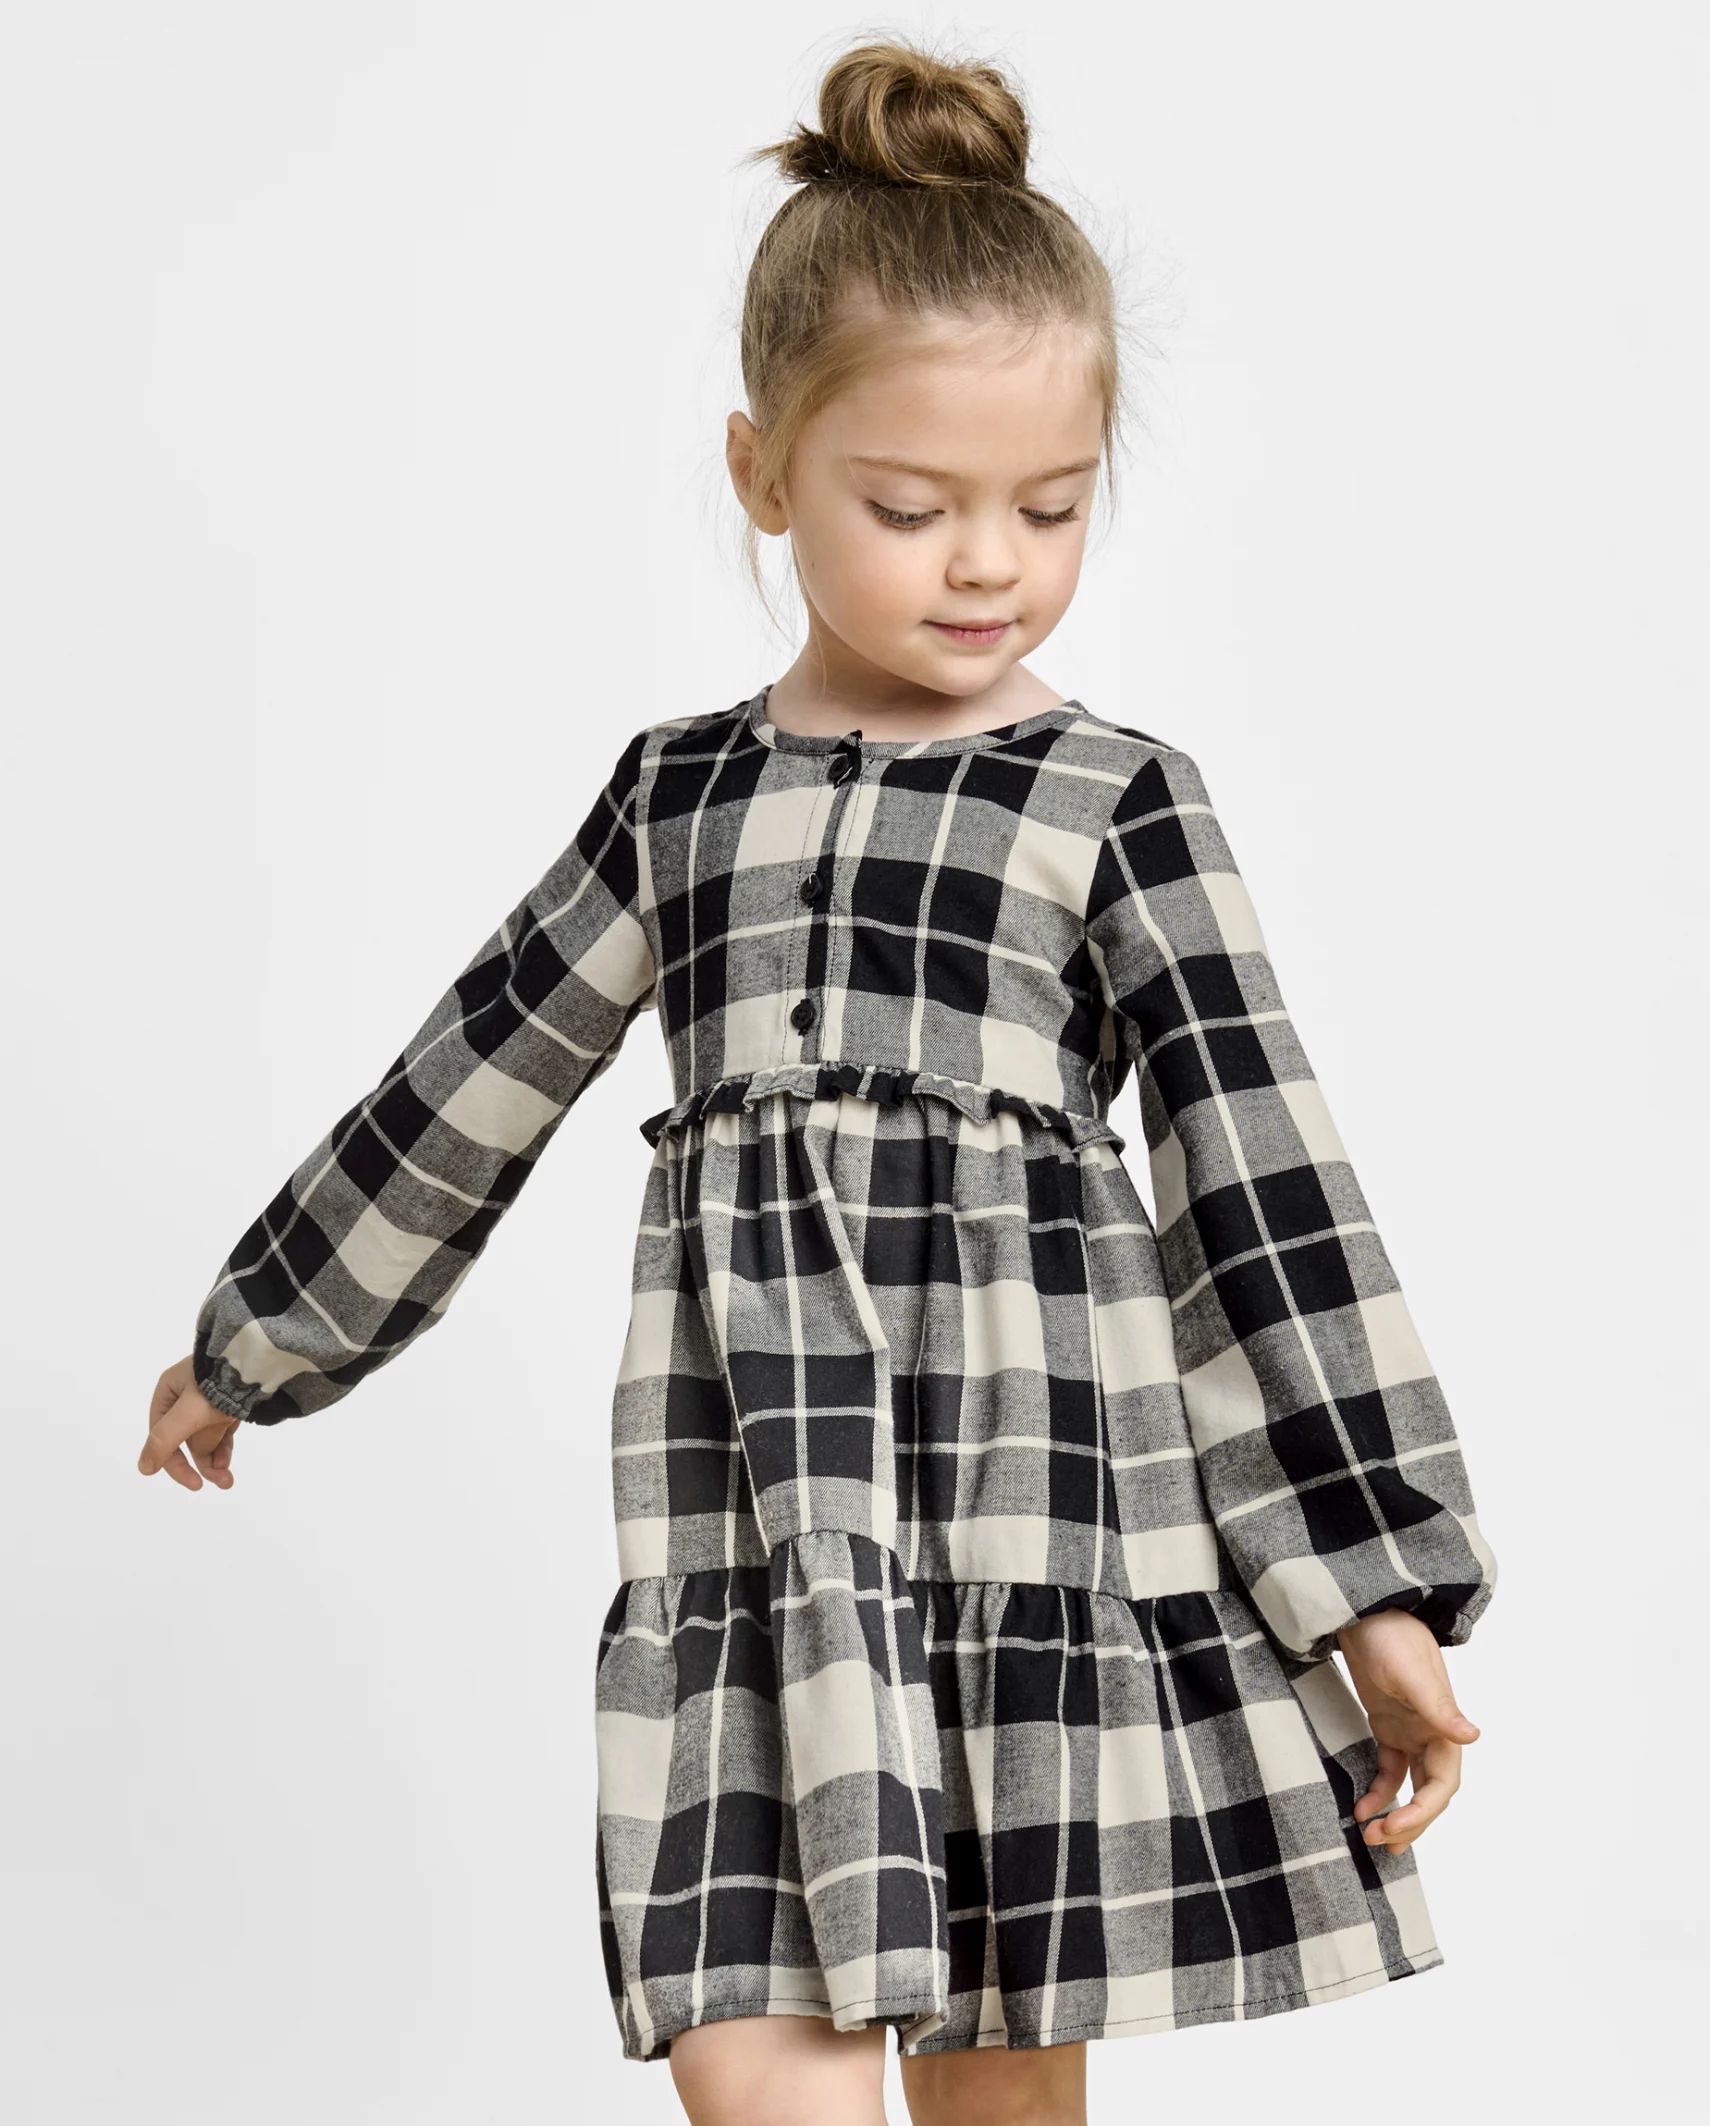 Toddler Girls Matching Family Plaid Twill Tiered Shirt Dress - black | The Children's Place